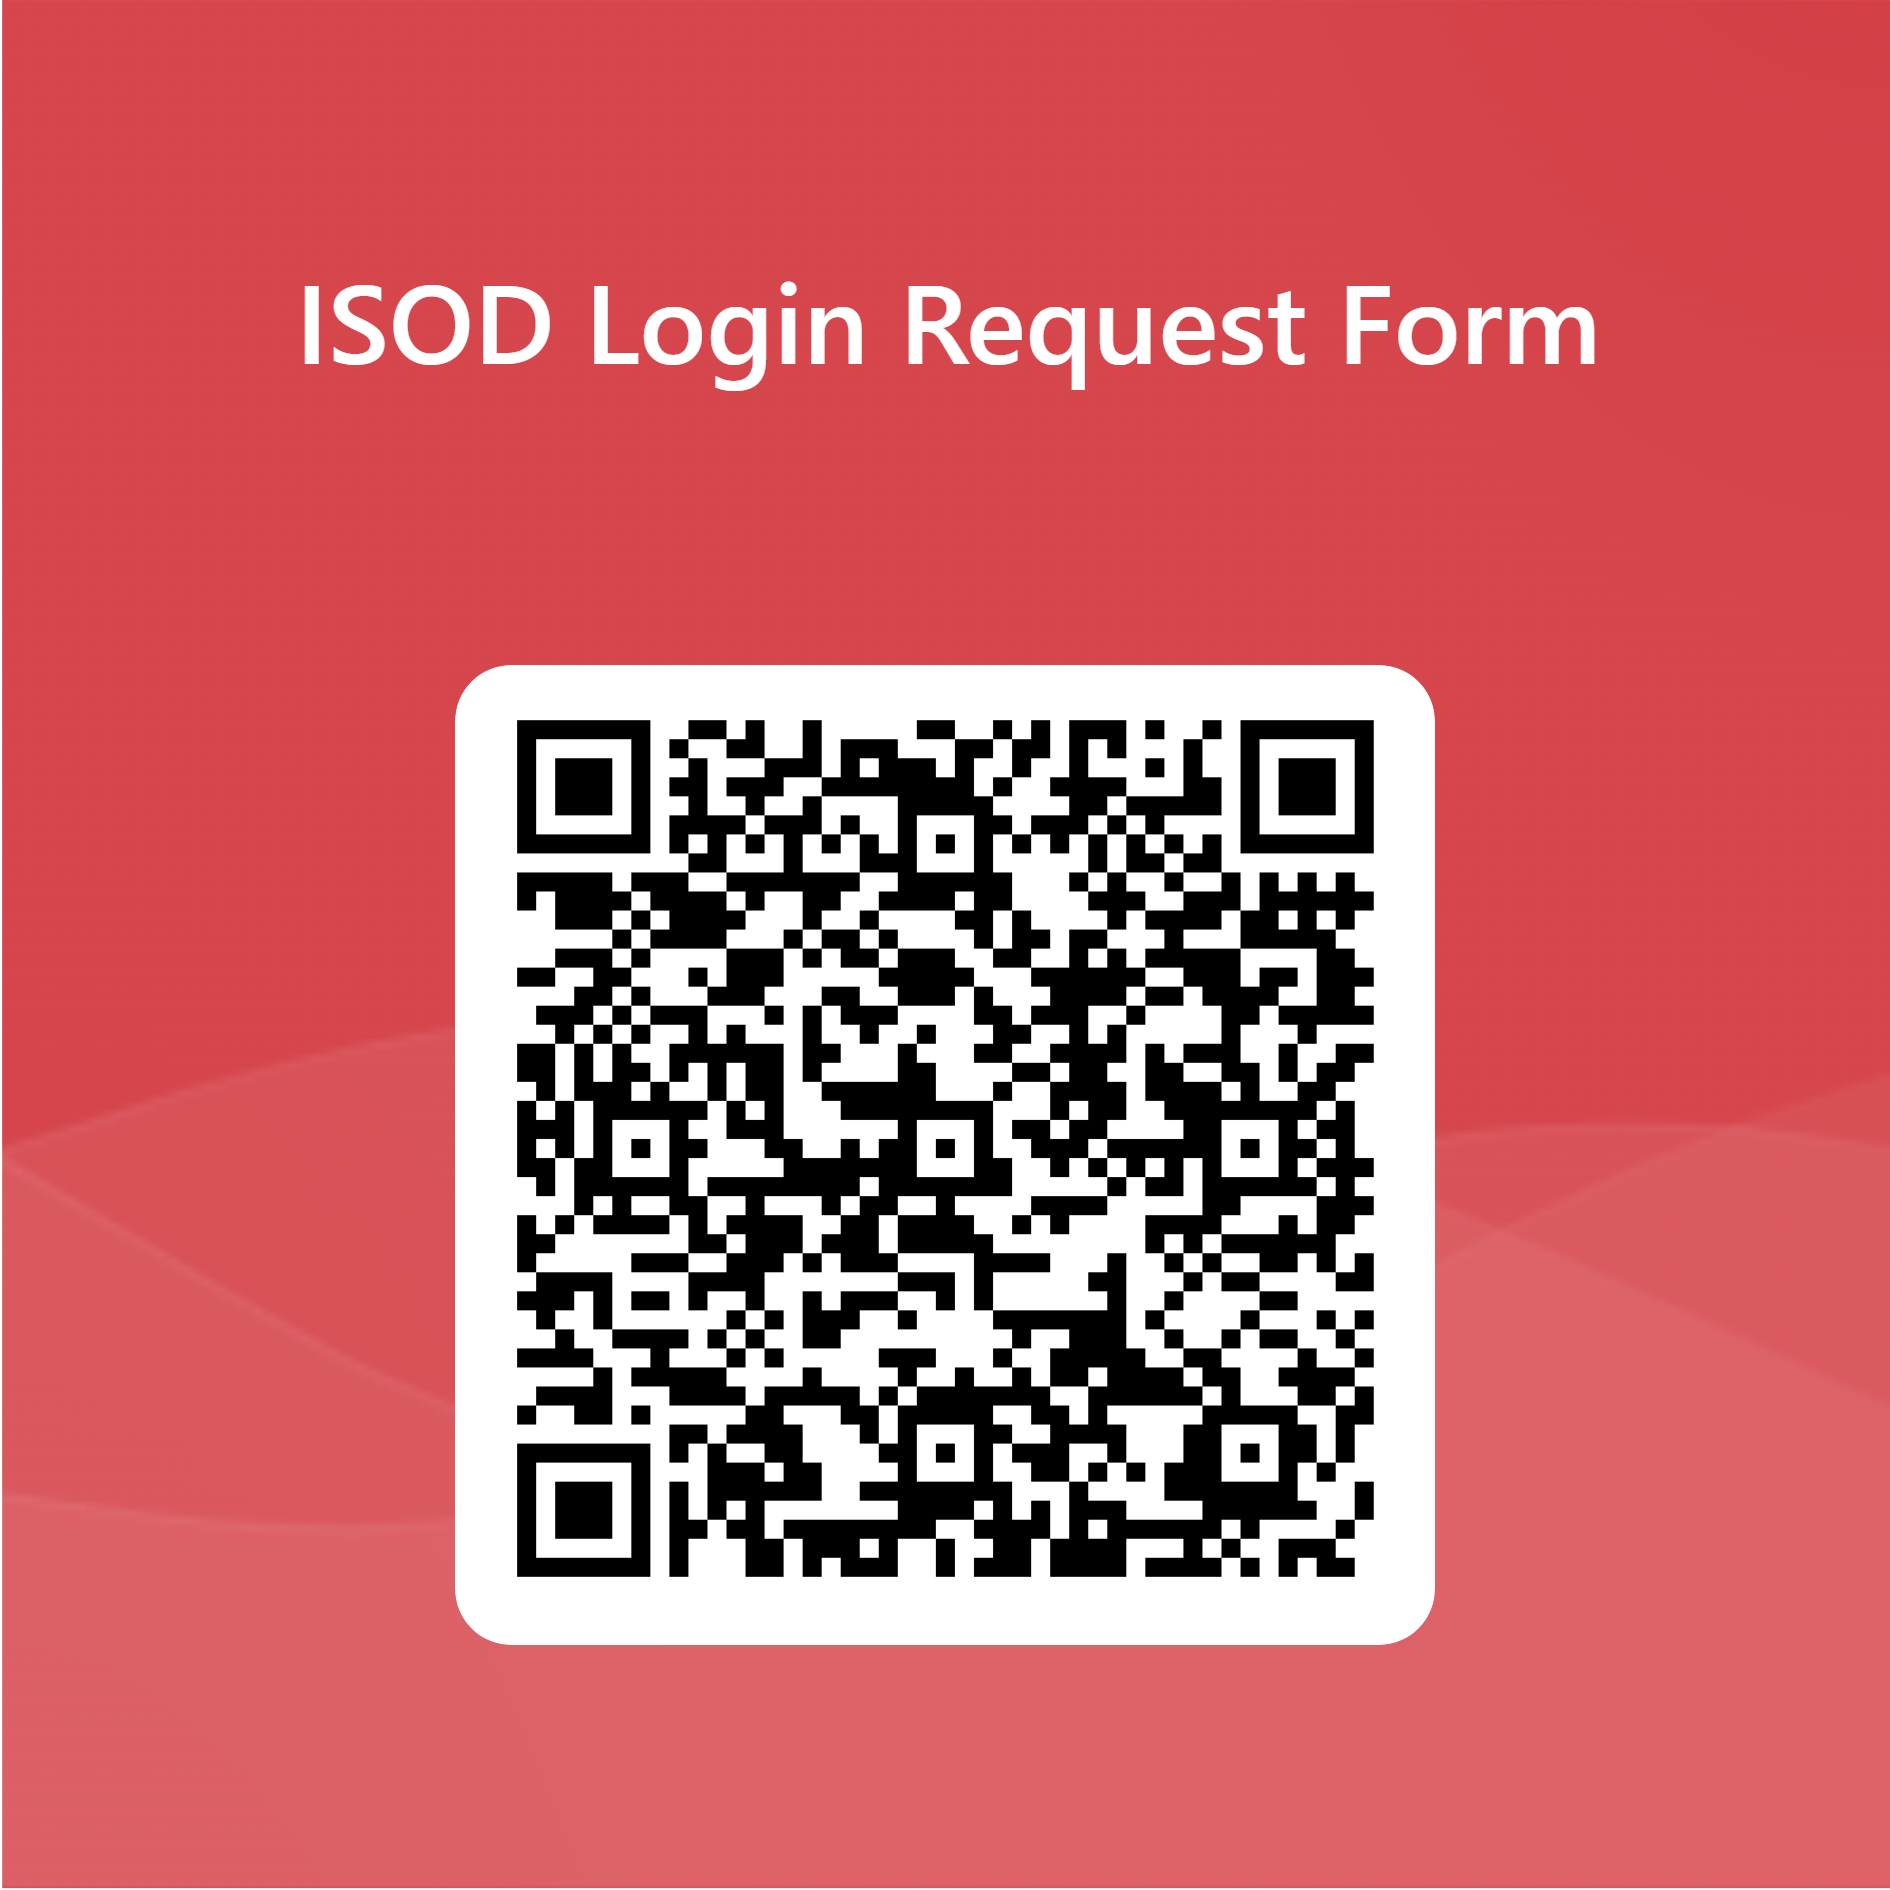 ISOD Login Request Form